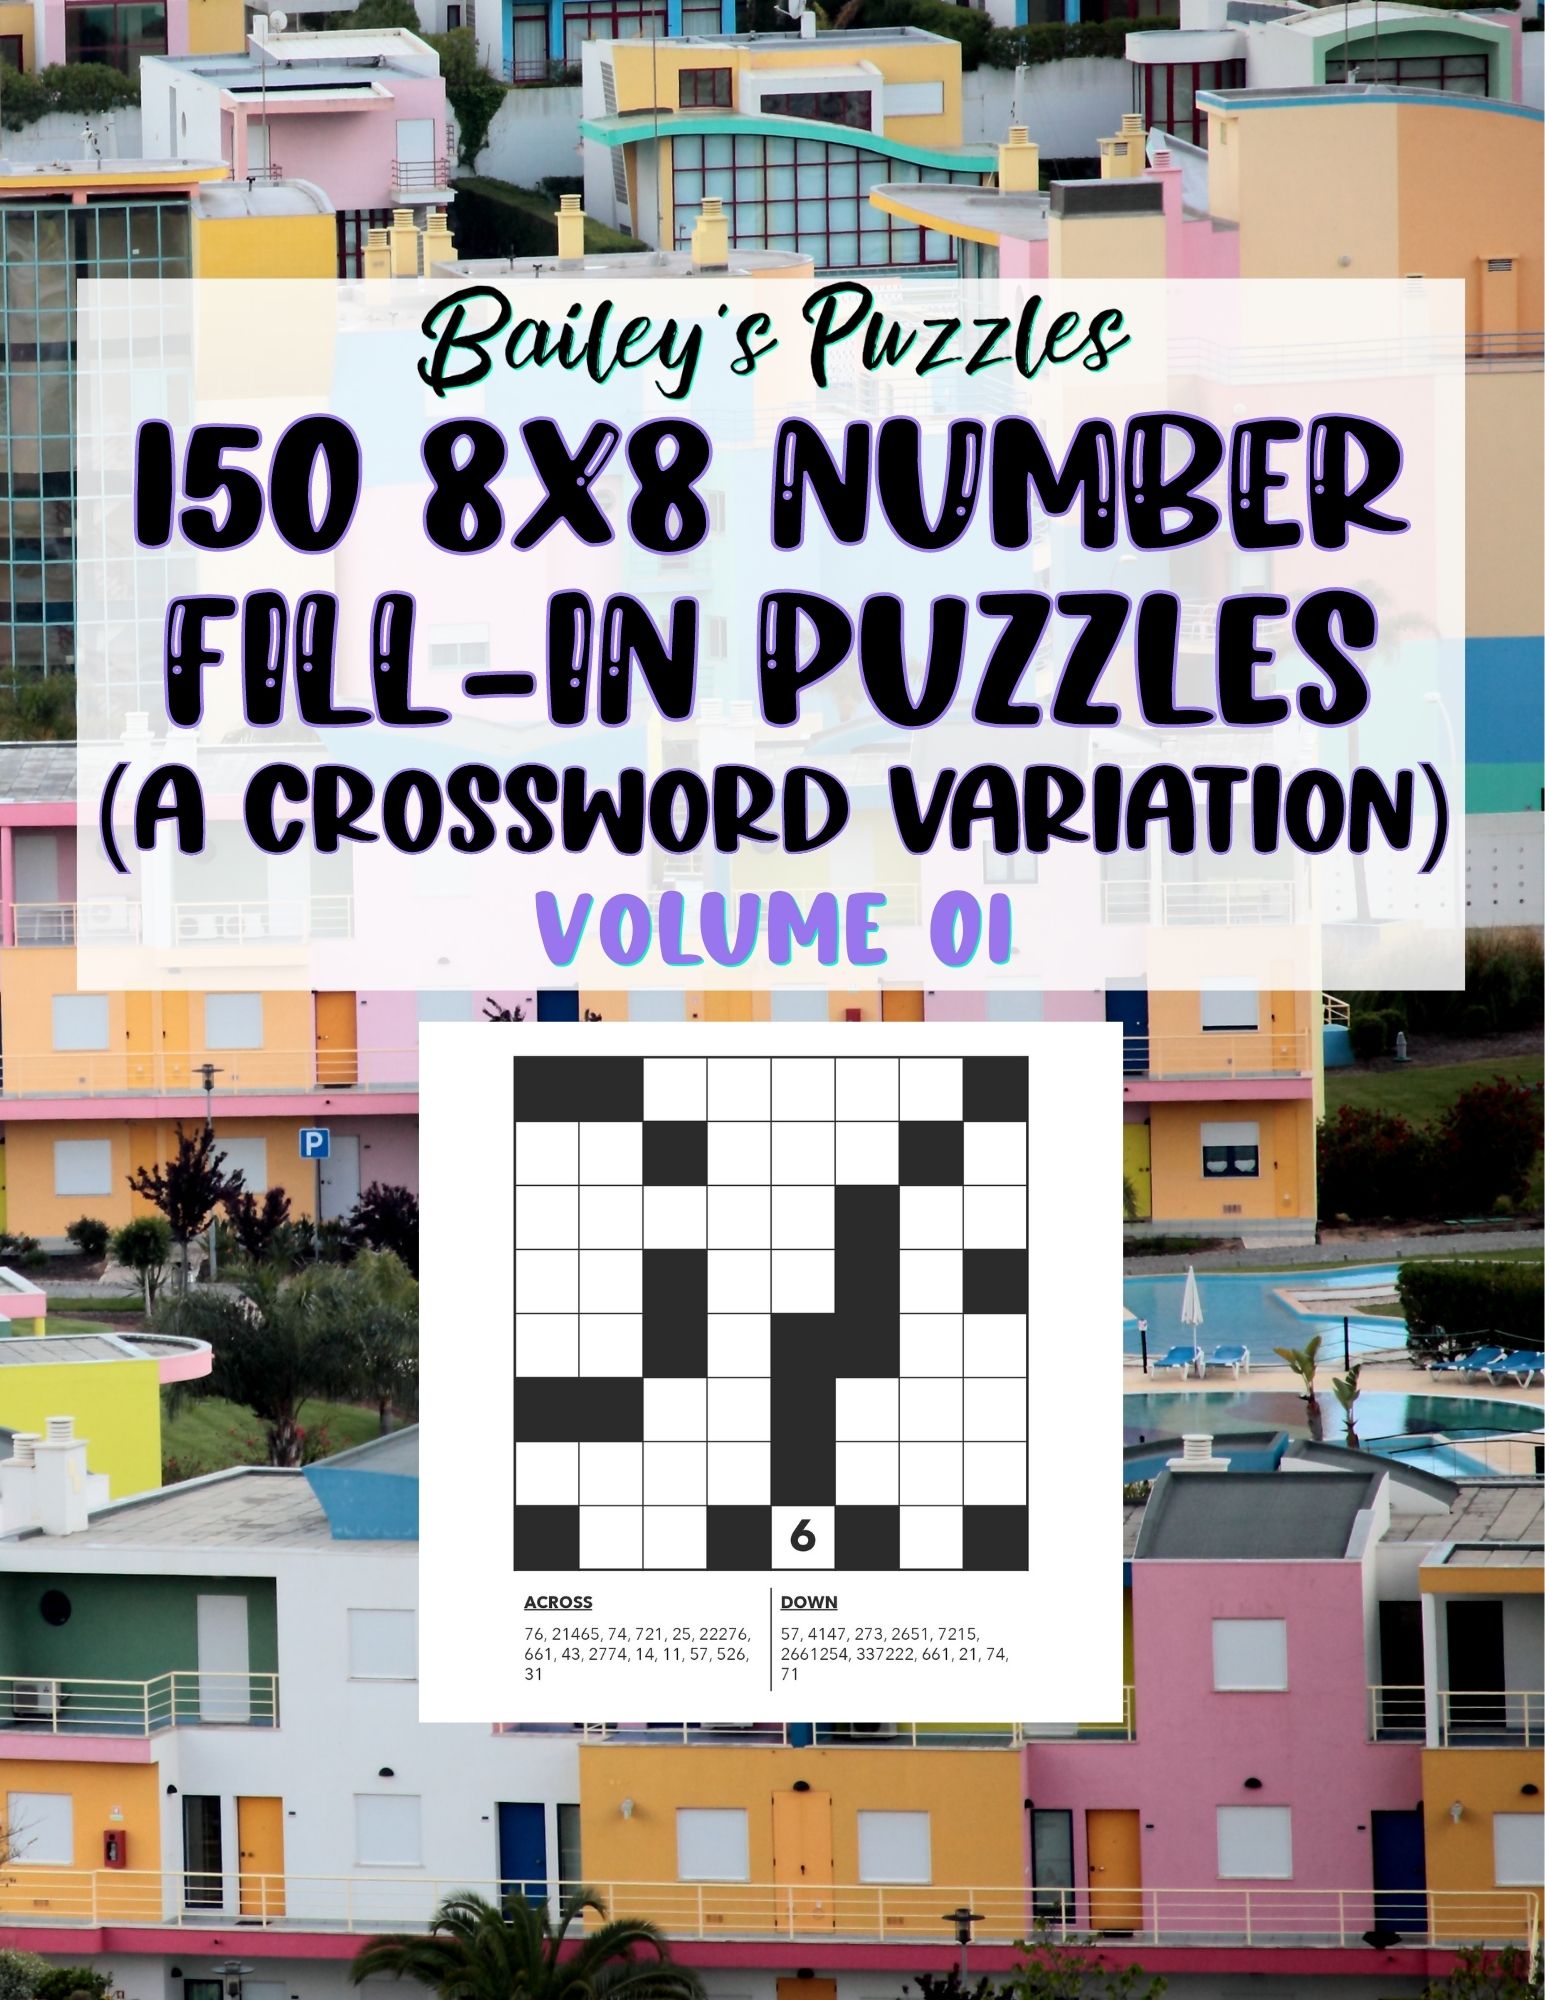 Front Cover - 150 8x8 Number Fill-In Puzzles (a crossword variation): volume 1